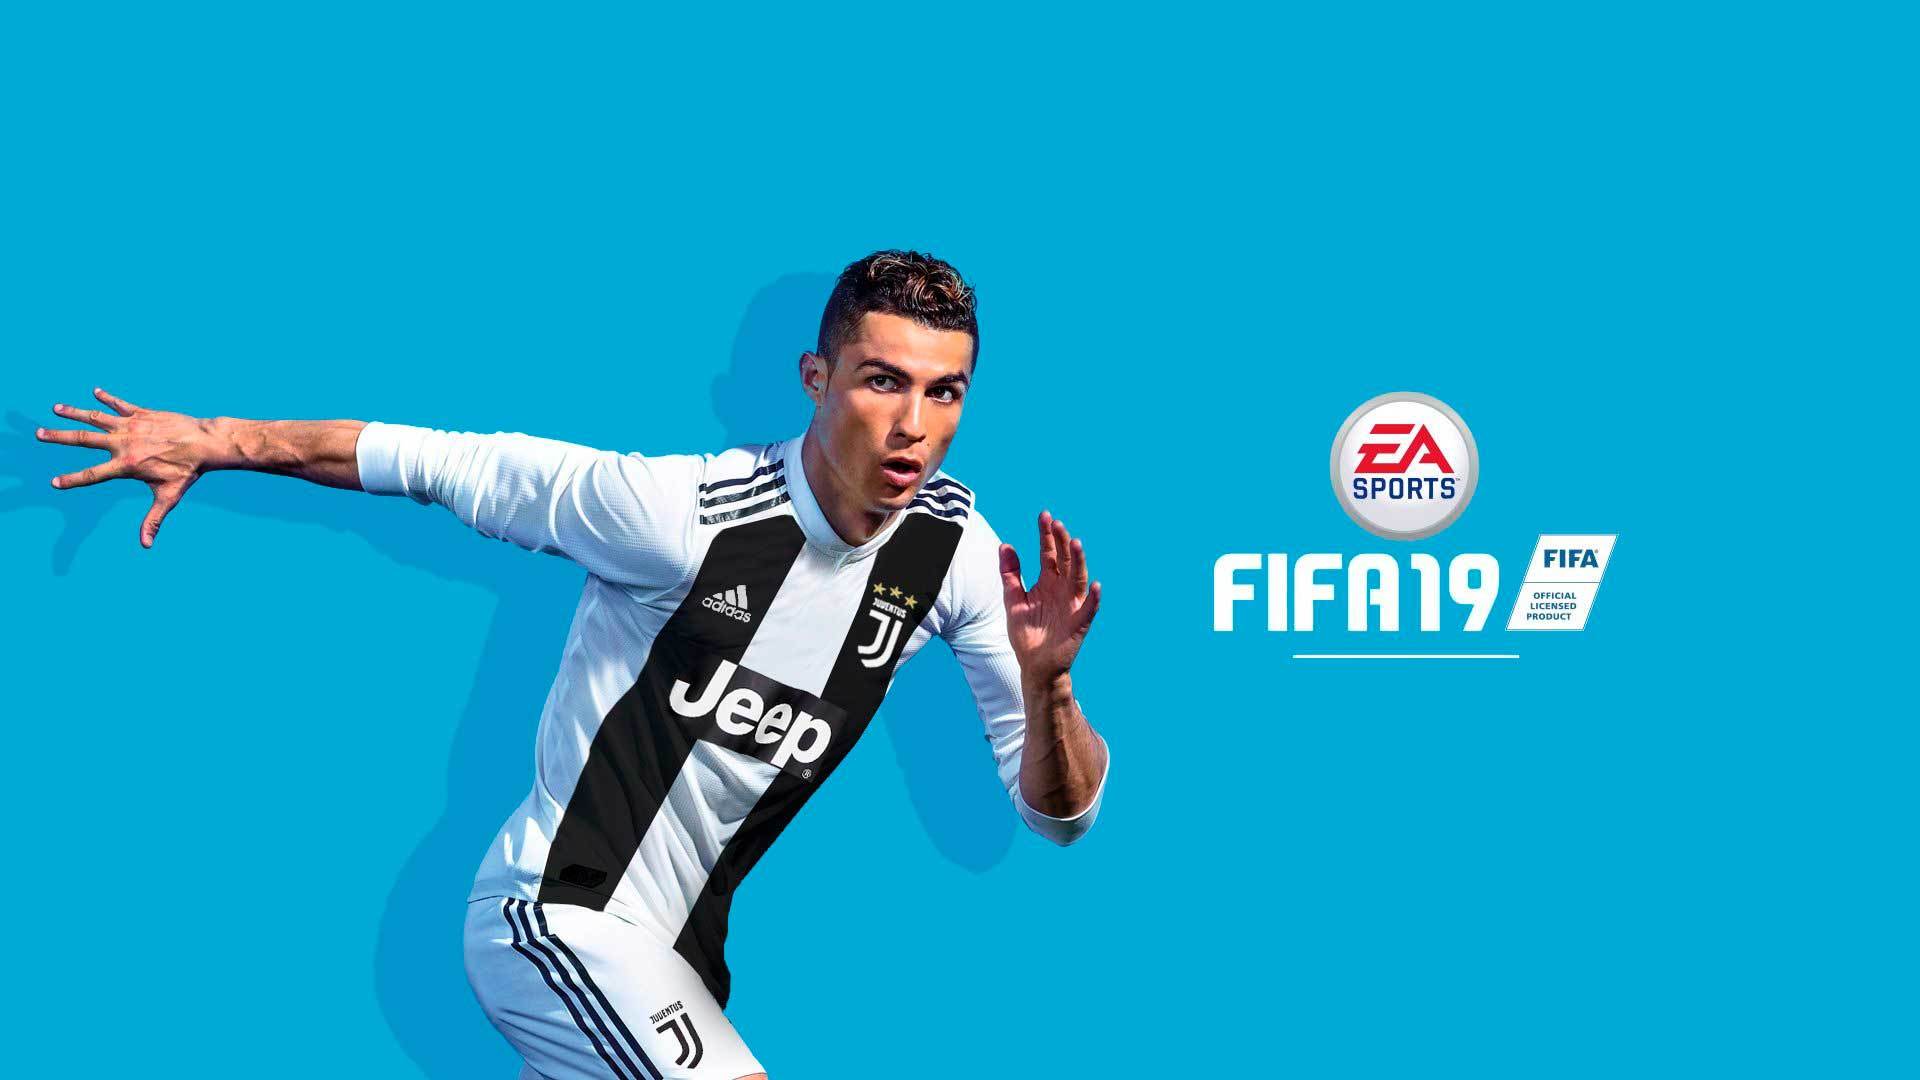 Cristiano Ronaldo FIFA 19 Game Wallpaper, HD Games 4K Wallpapers, Images,  Photos and Background - Wallpapers Den